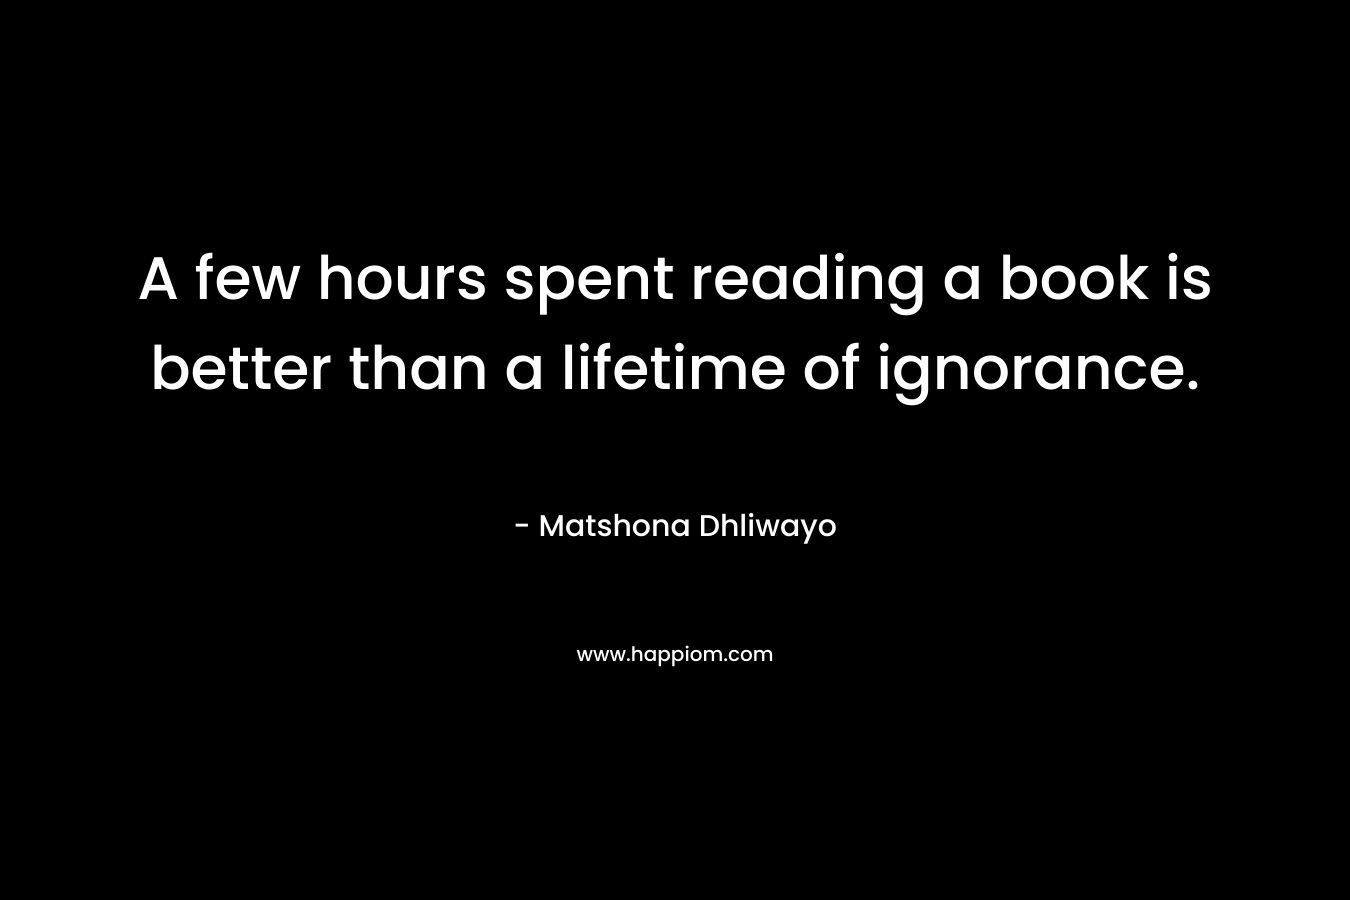 A few hours spent reading a book is better than a lifetime of ignorance.